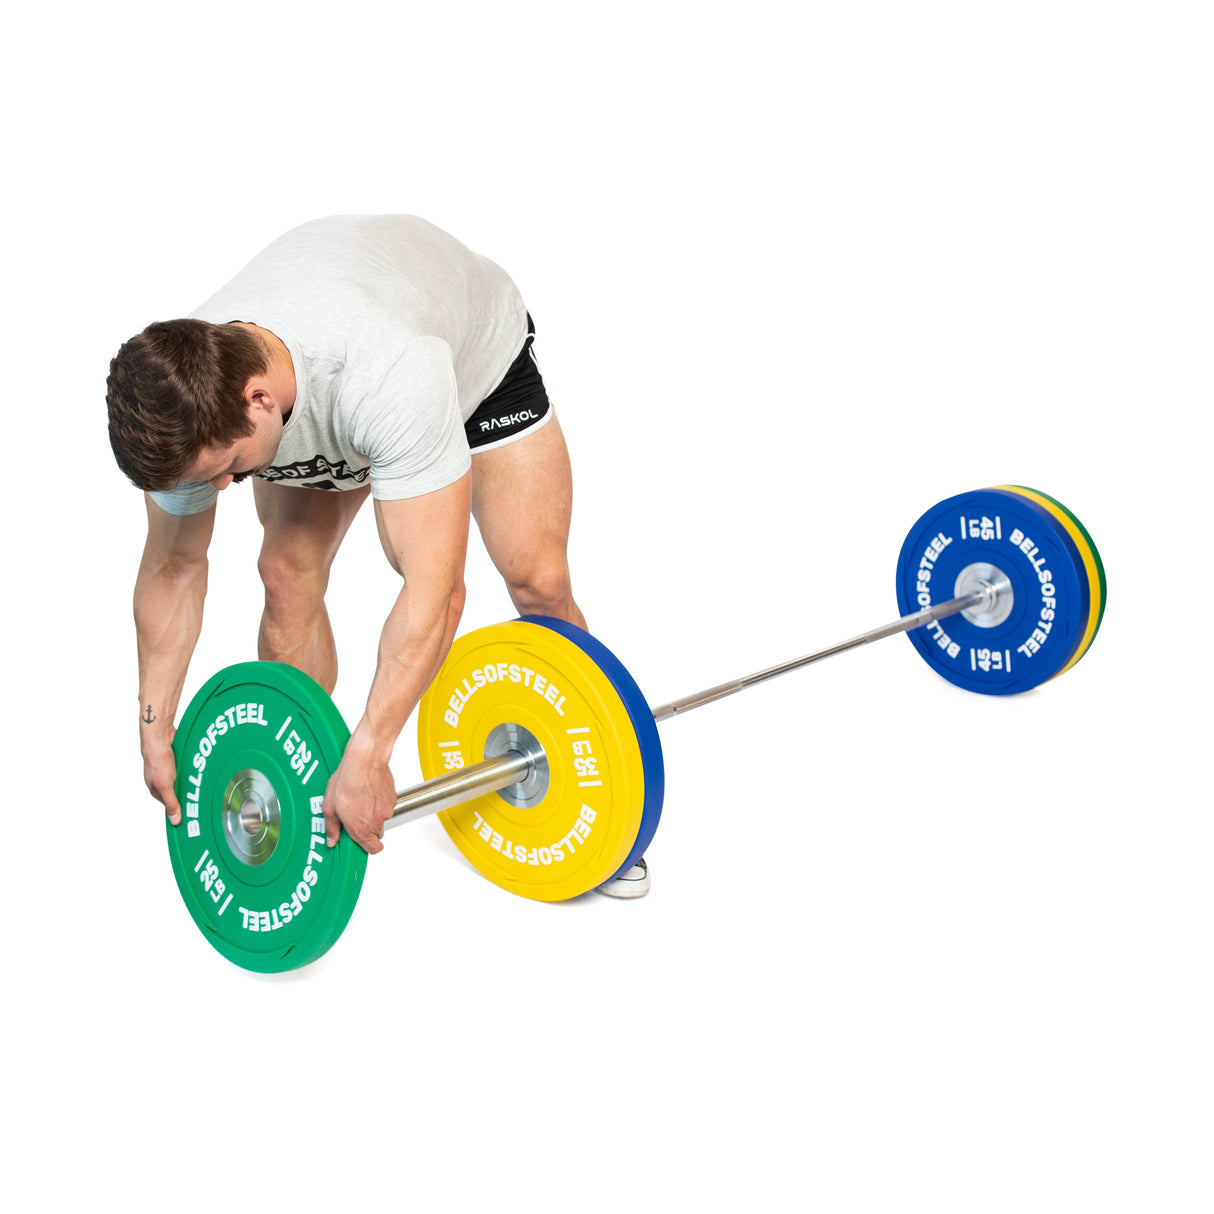 Male athlete loading Urethane Bumper Plates onto the barbell